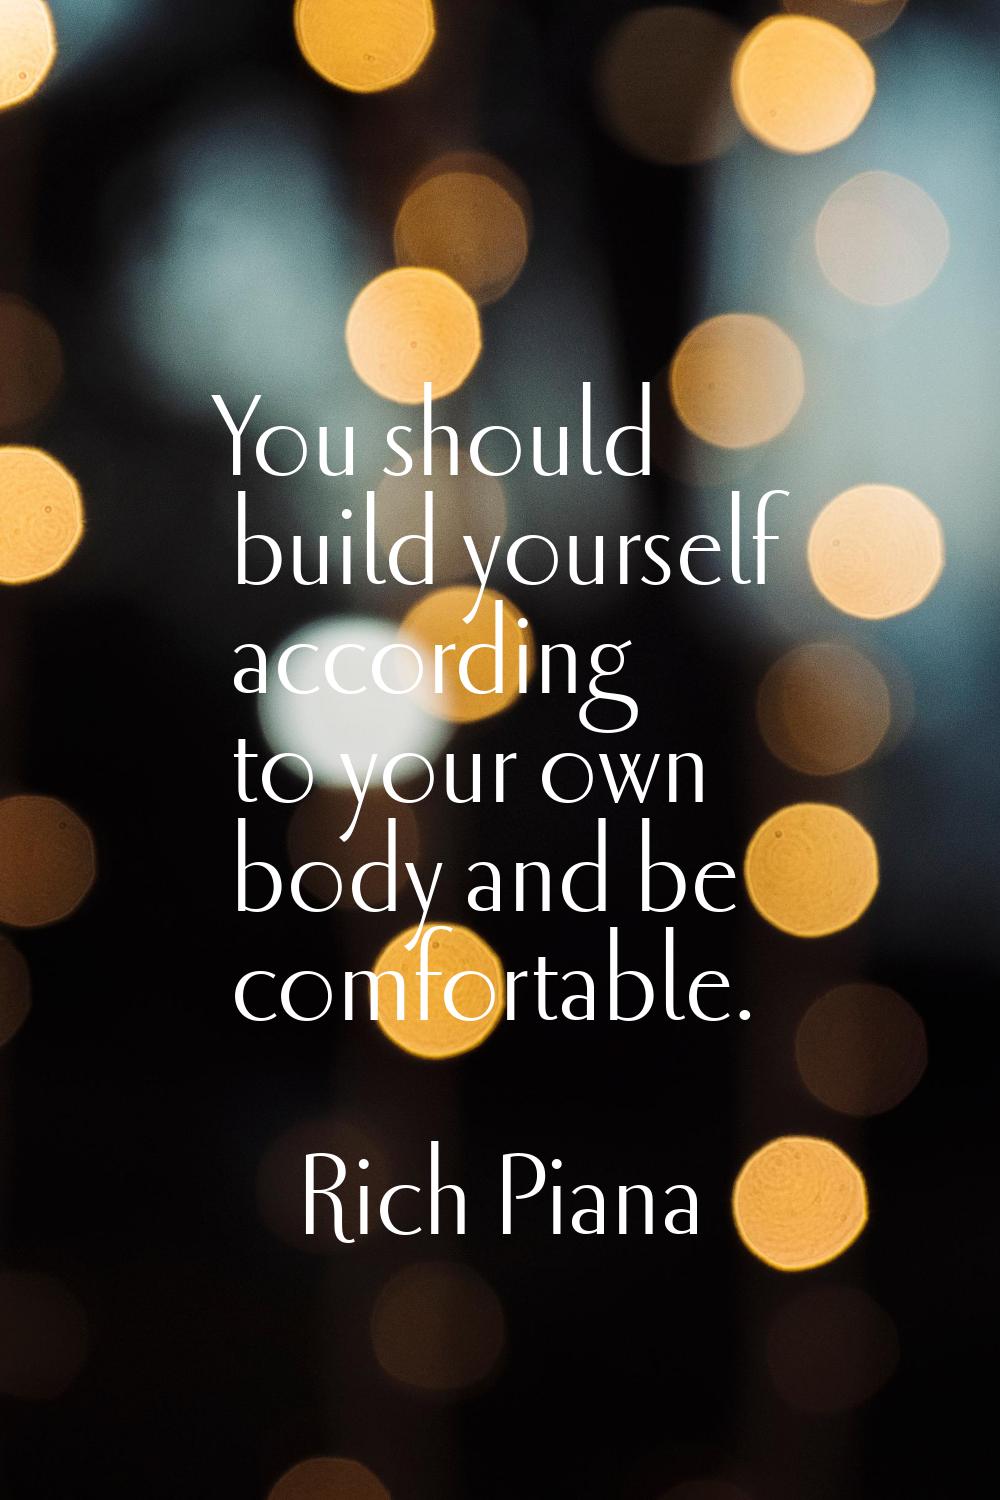 You should build yourself according to your own body and be comfortable.